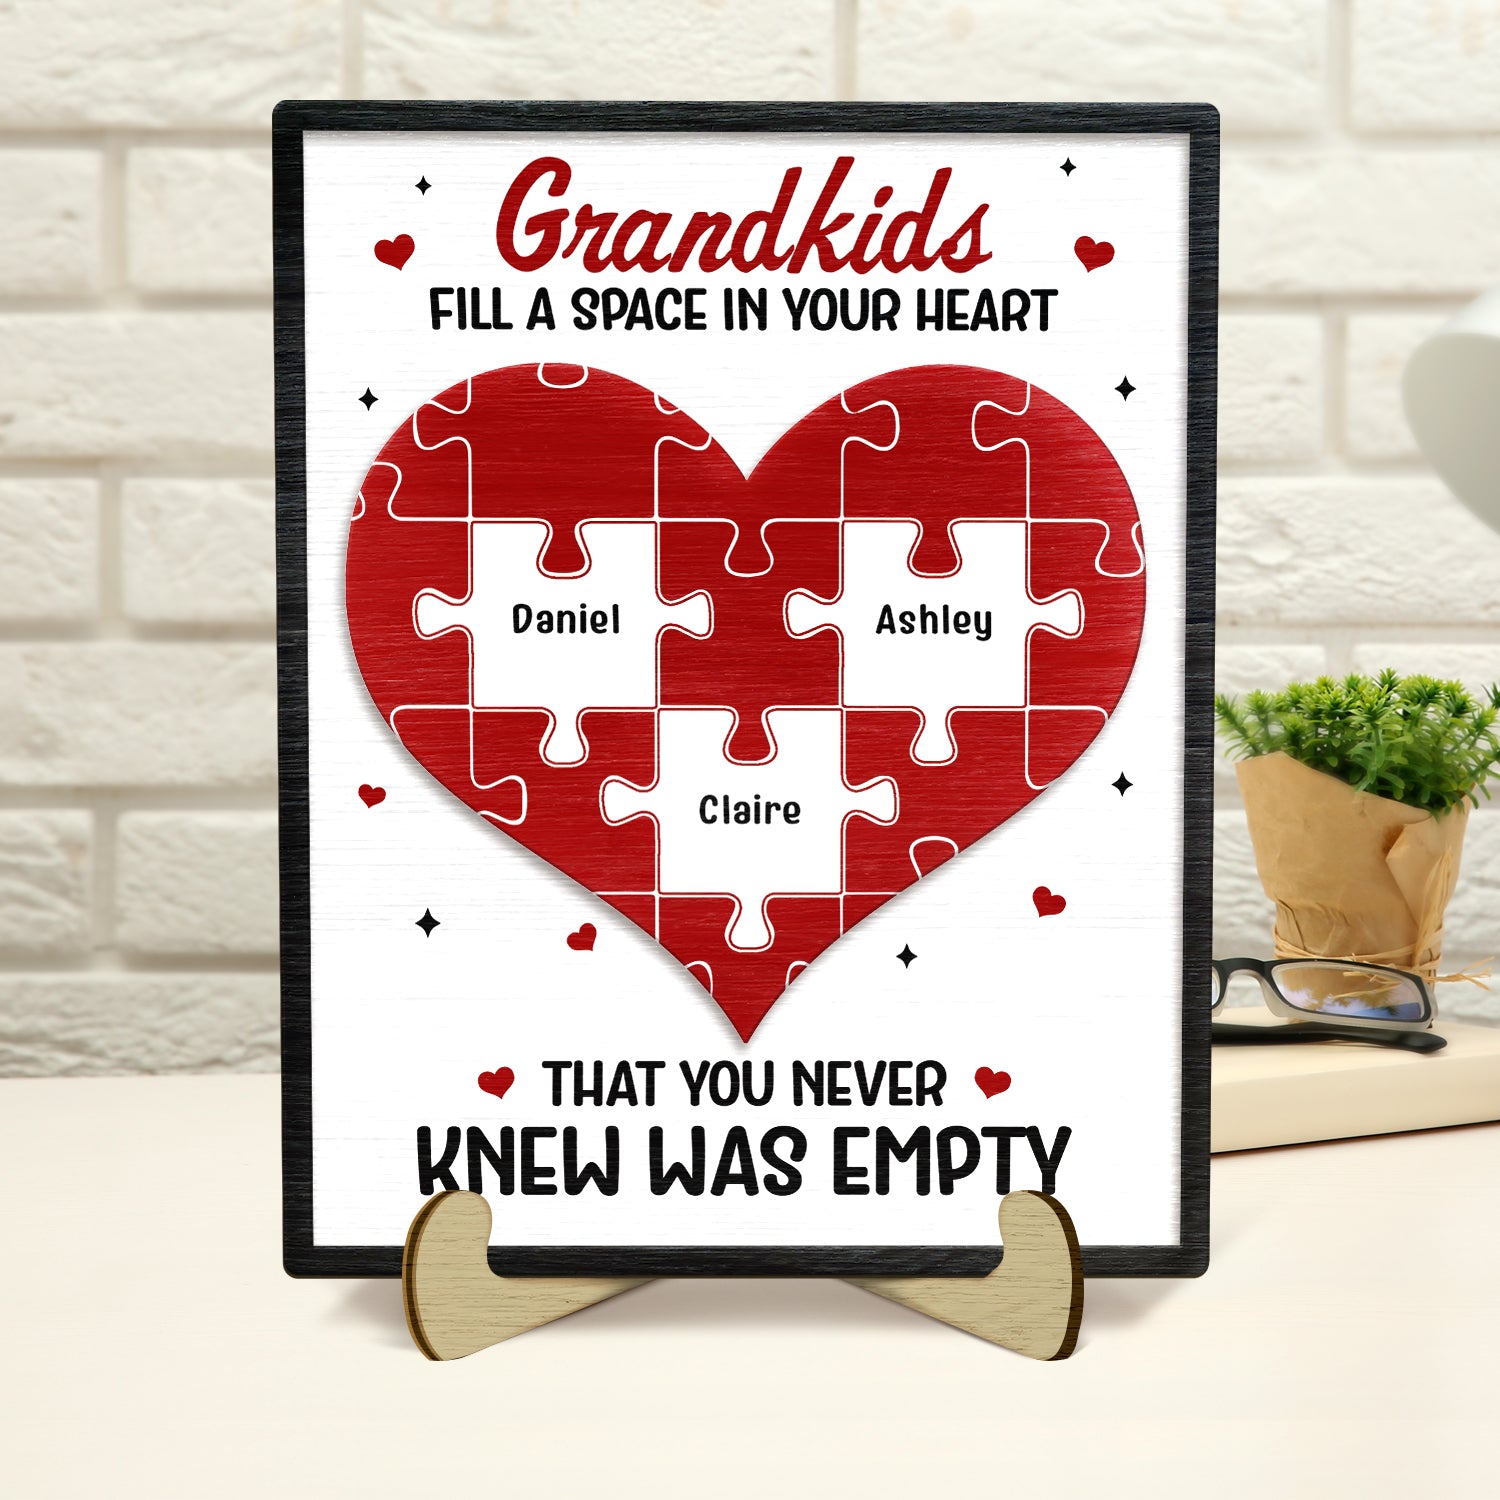 Grandkids Fill A Space In Your Heart - Gift For Grandma - Personalized 2-Layered Wooden Plaque With Stand